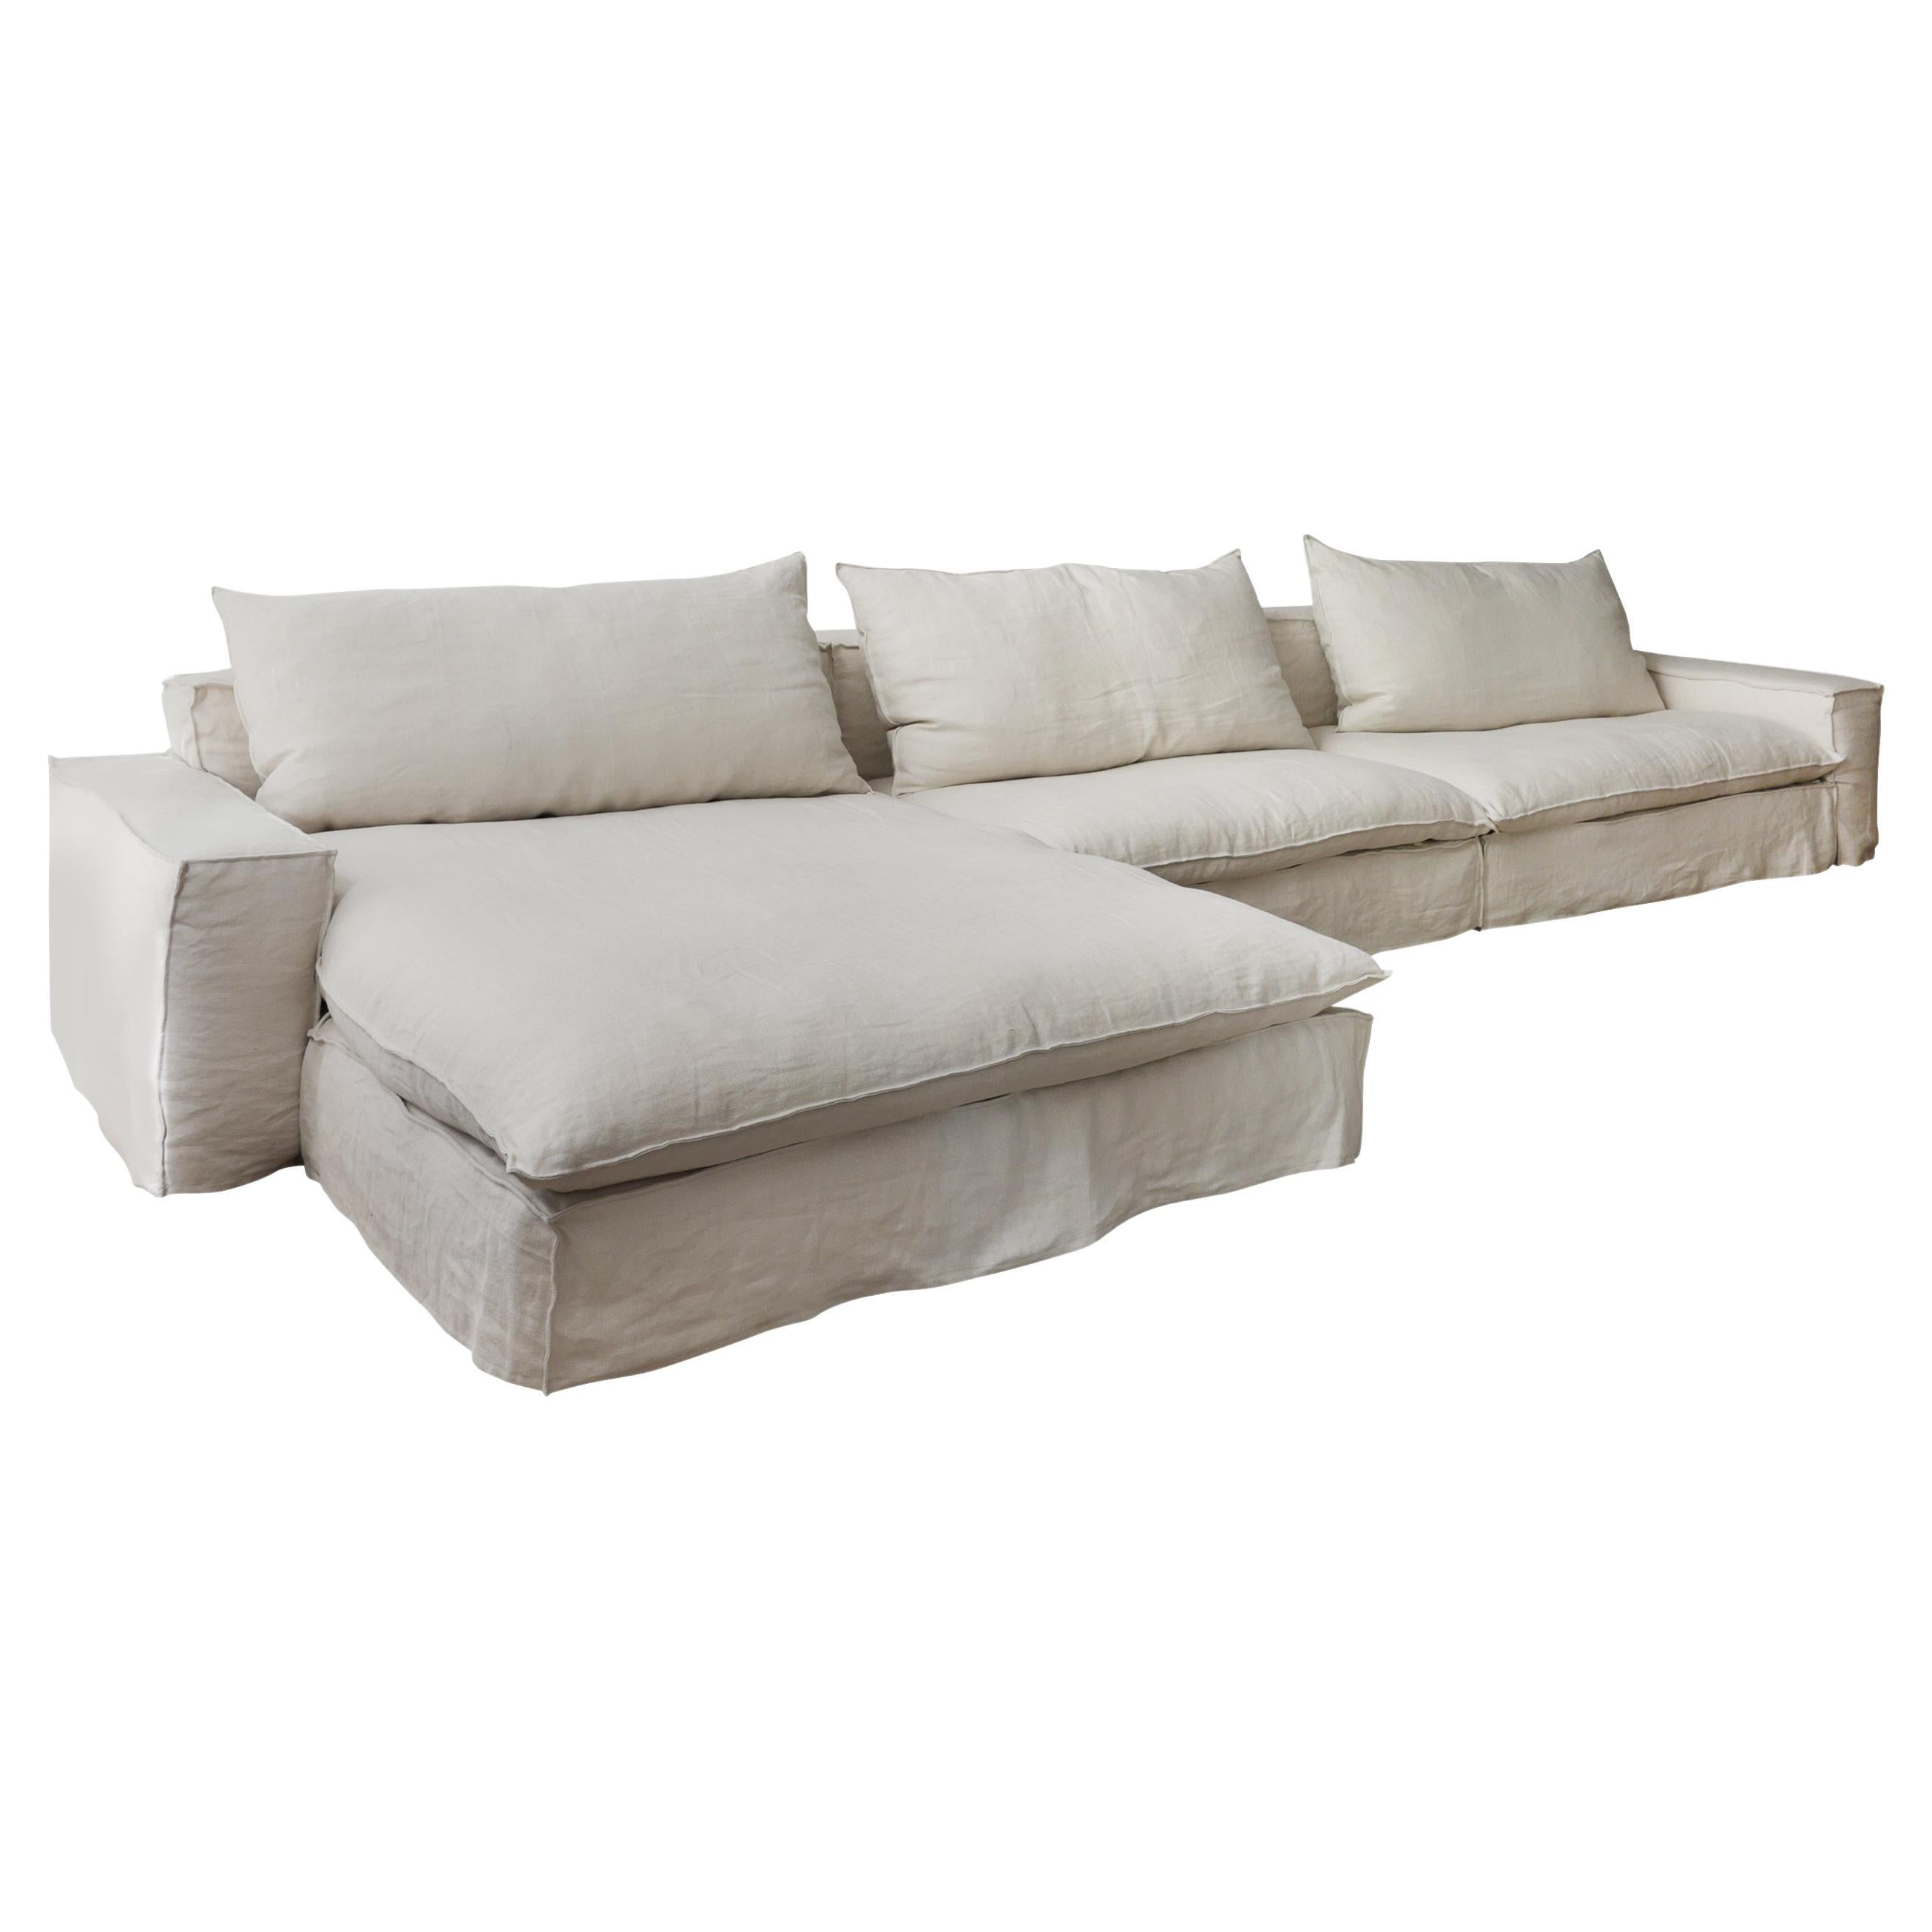 Pluma Sofa Set in Linen Color Fabric Upholstery For Sale